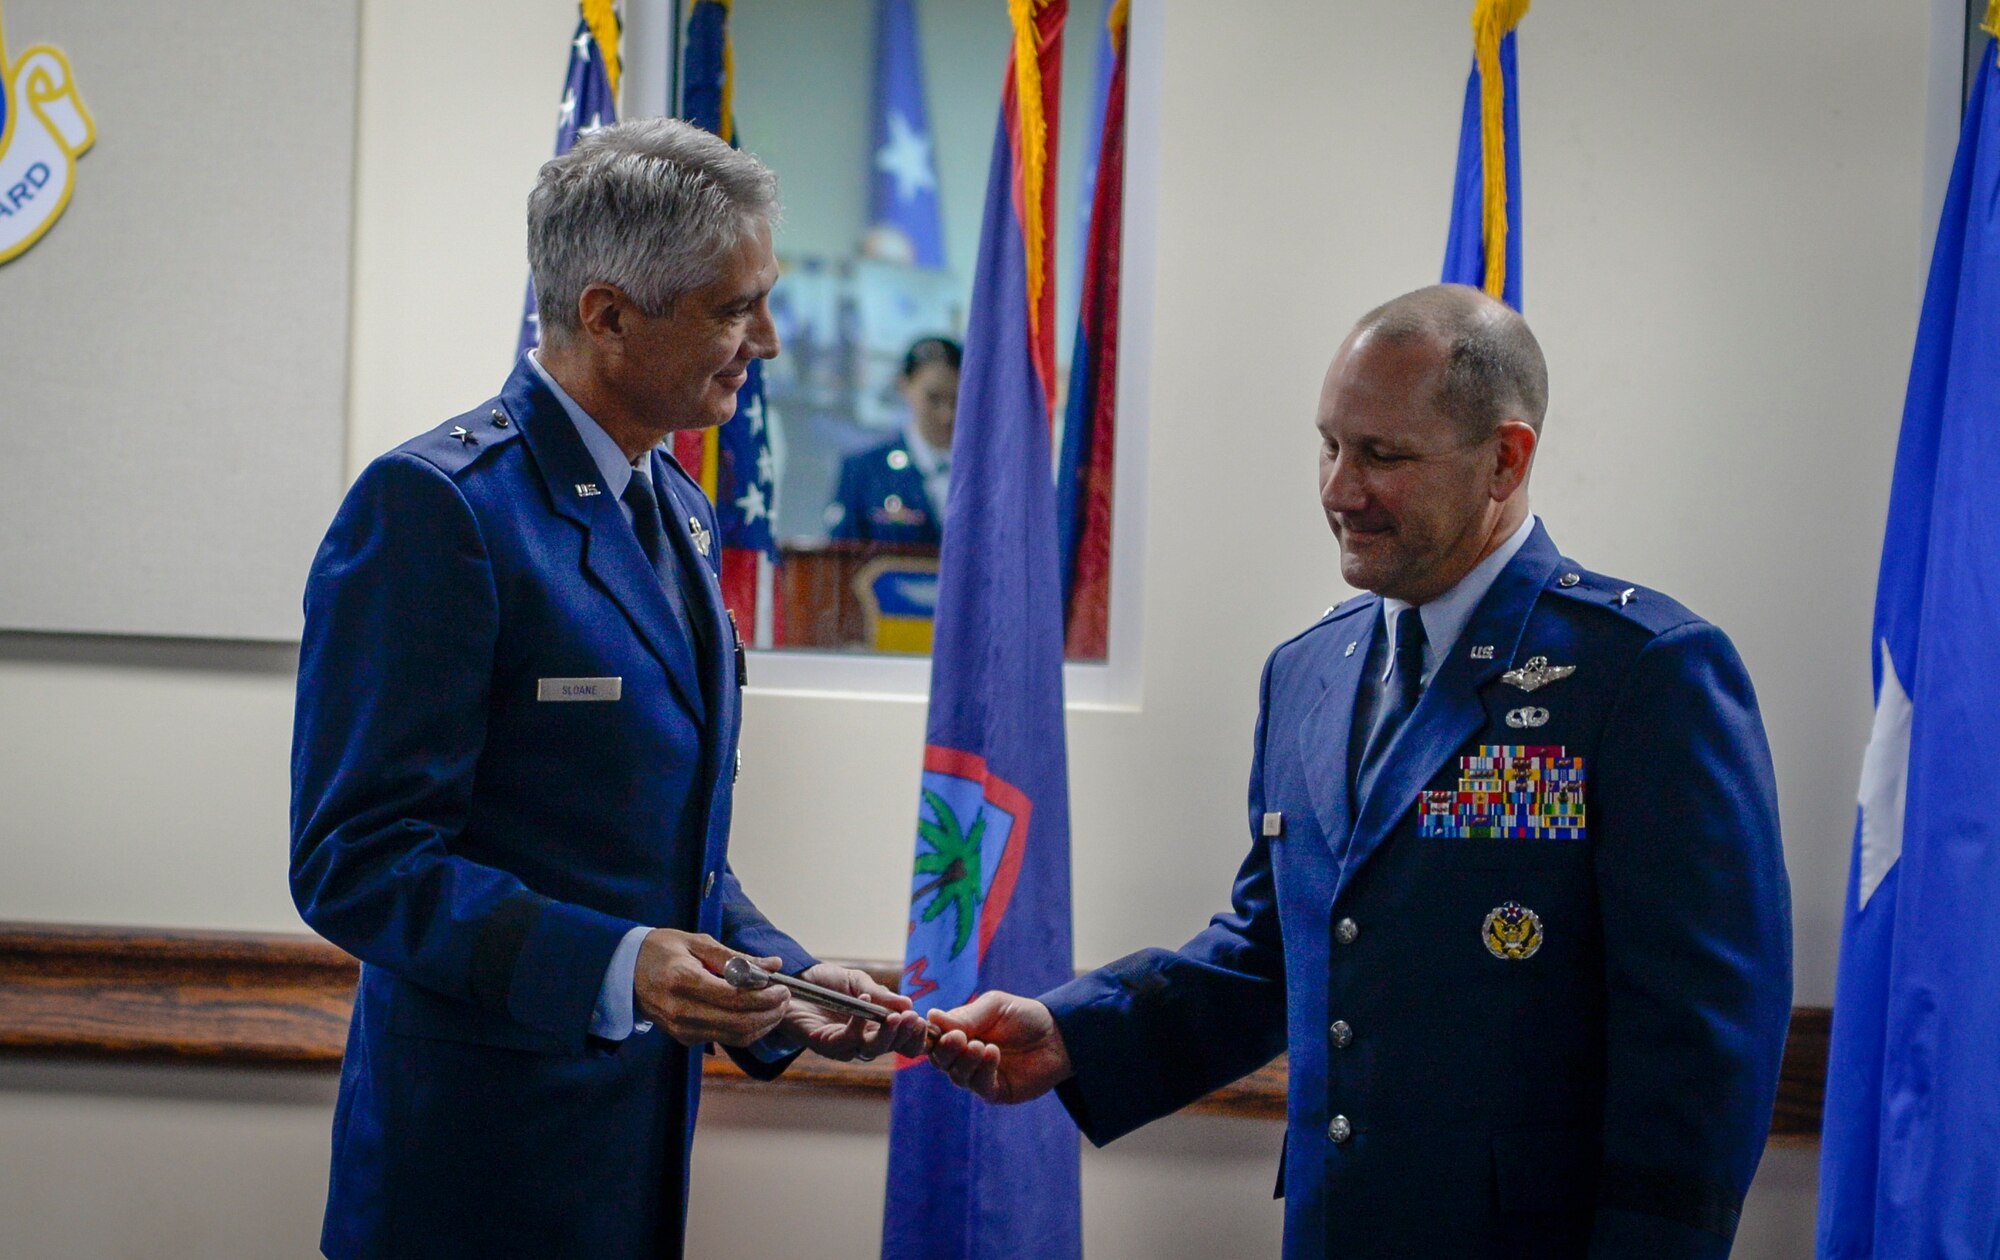 U.S. Air Force Brig. Gen. Gentry W. Boswell (right) passed the “swagger stick” to Brig. Gen. Jeremy T. Sloane during a change of command ceremony July 8, 2020, at Andersen Air Force Base, Guam.